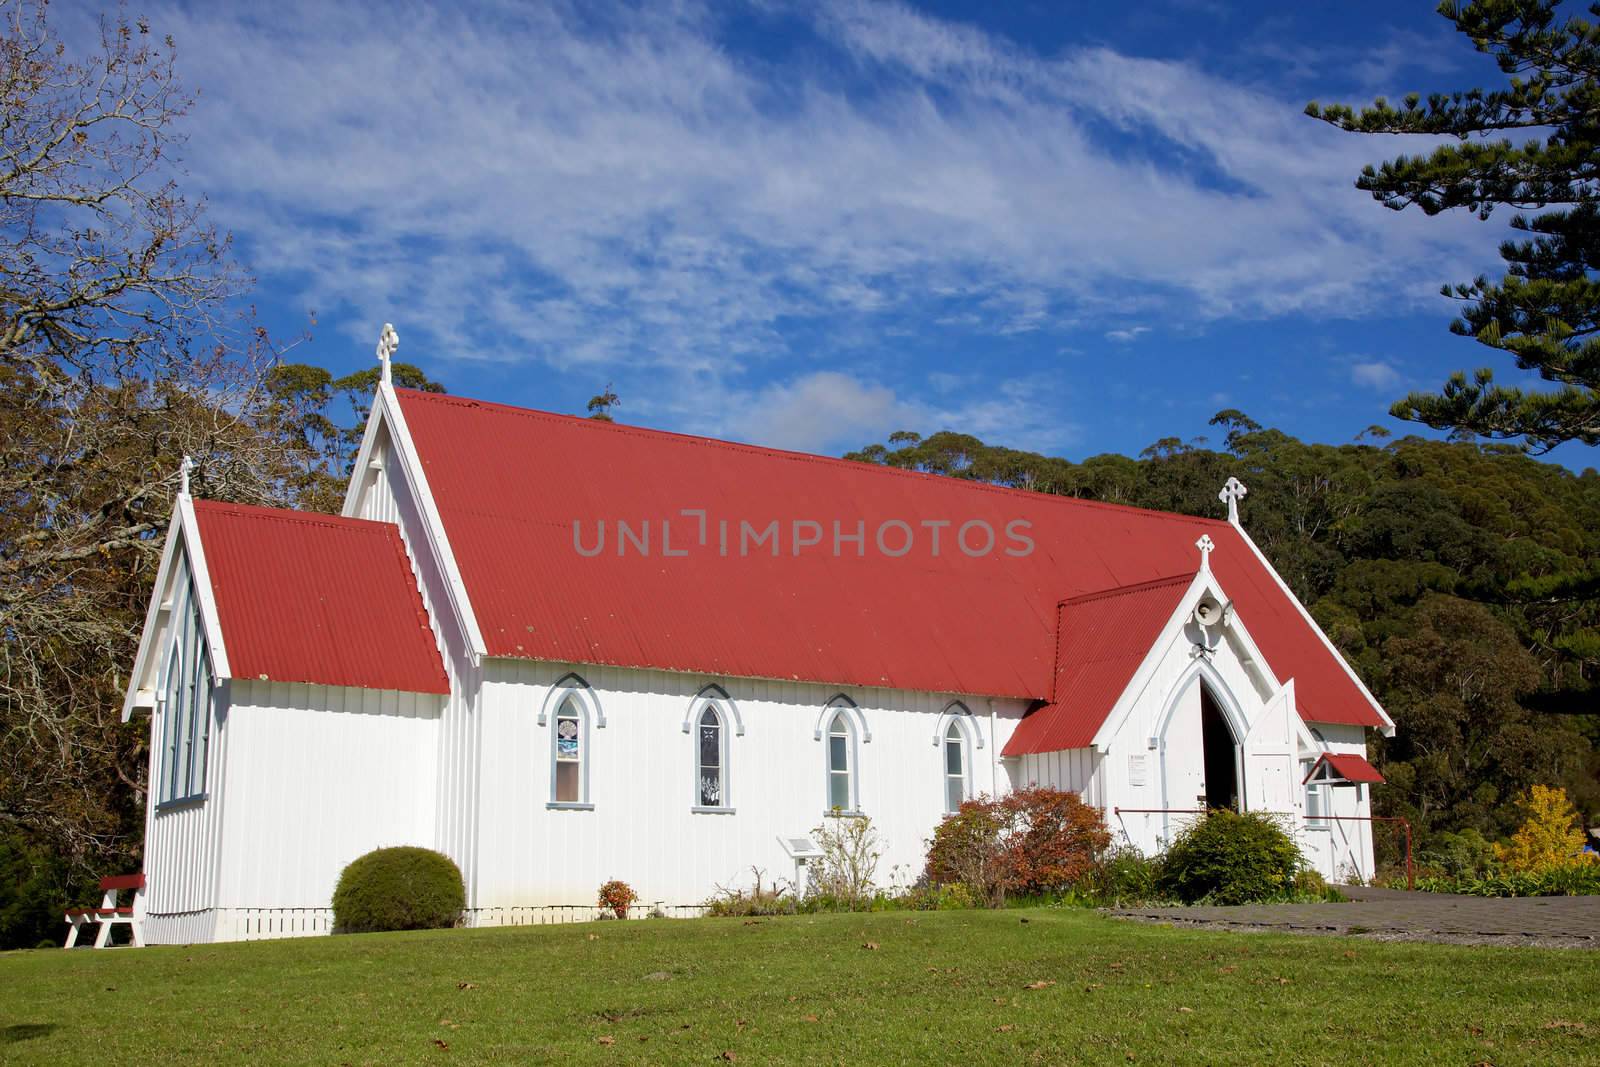 St James Anglican Church in the Kotorigo-Kerikeri Basin Heritage Area of North Island, New Zealand. It is the third church built in the area and was dedicated in 1878.